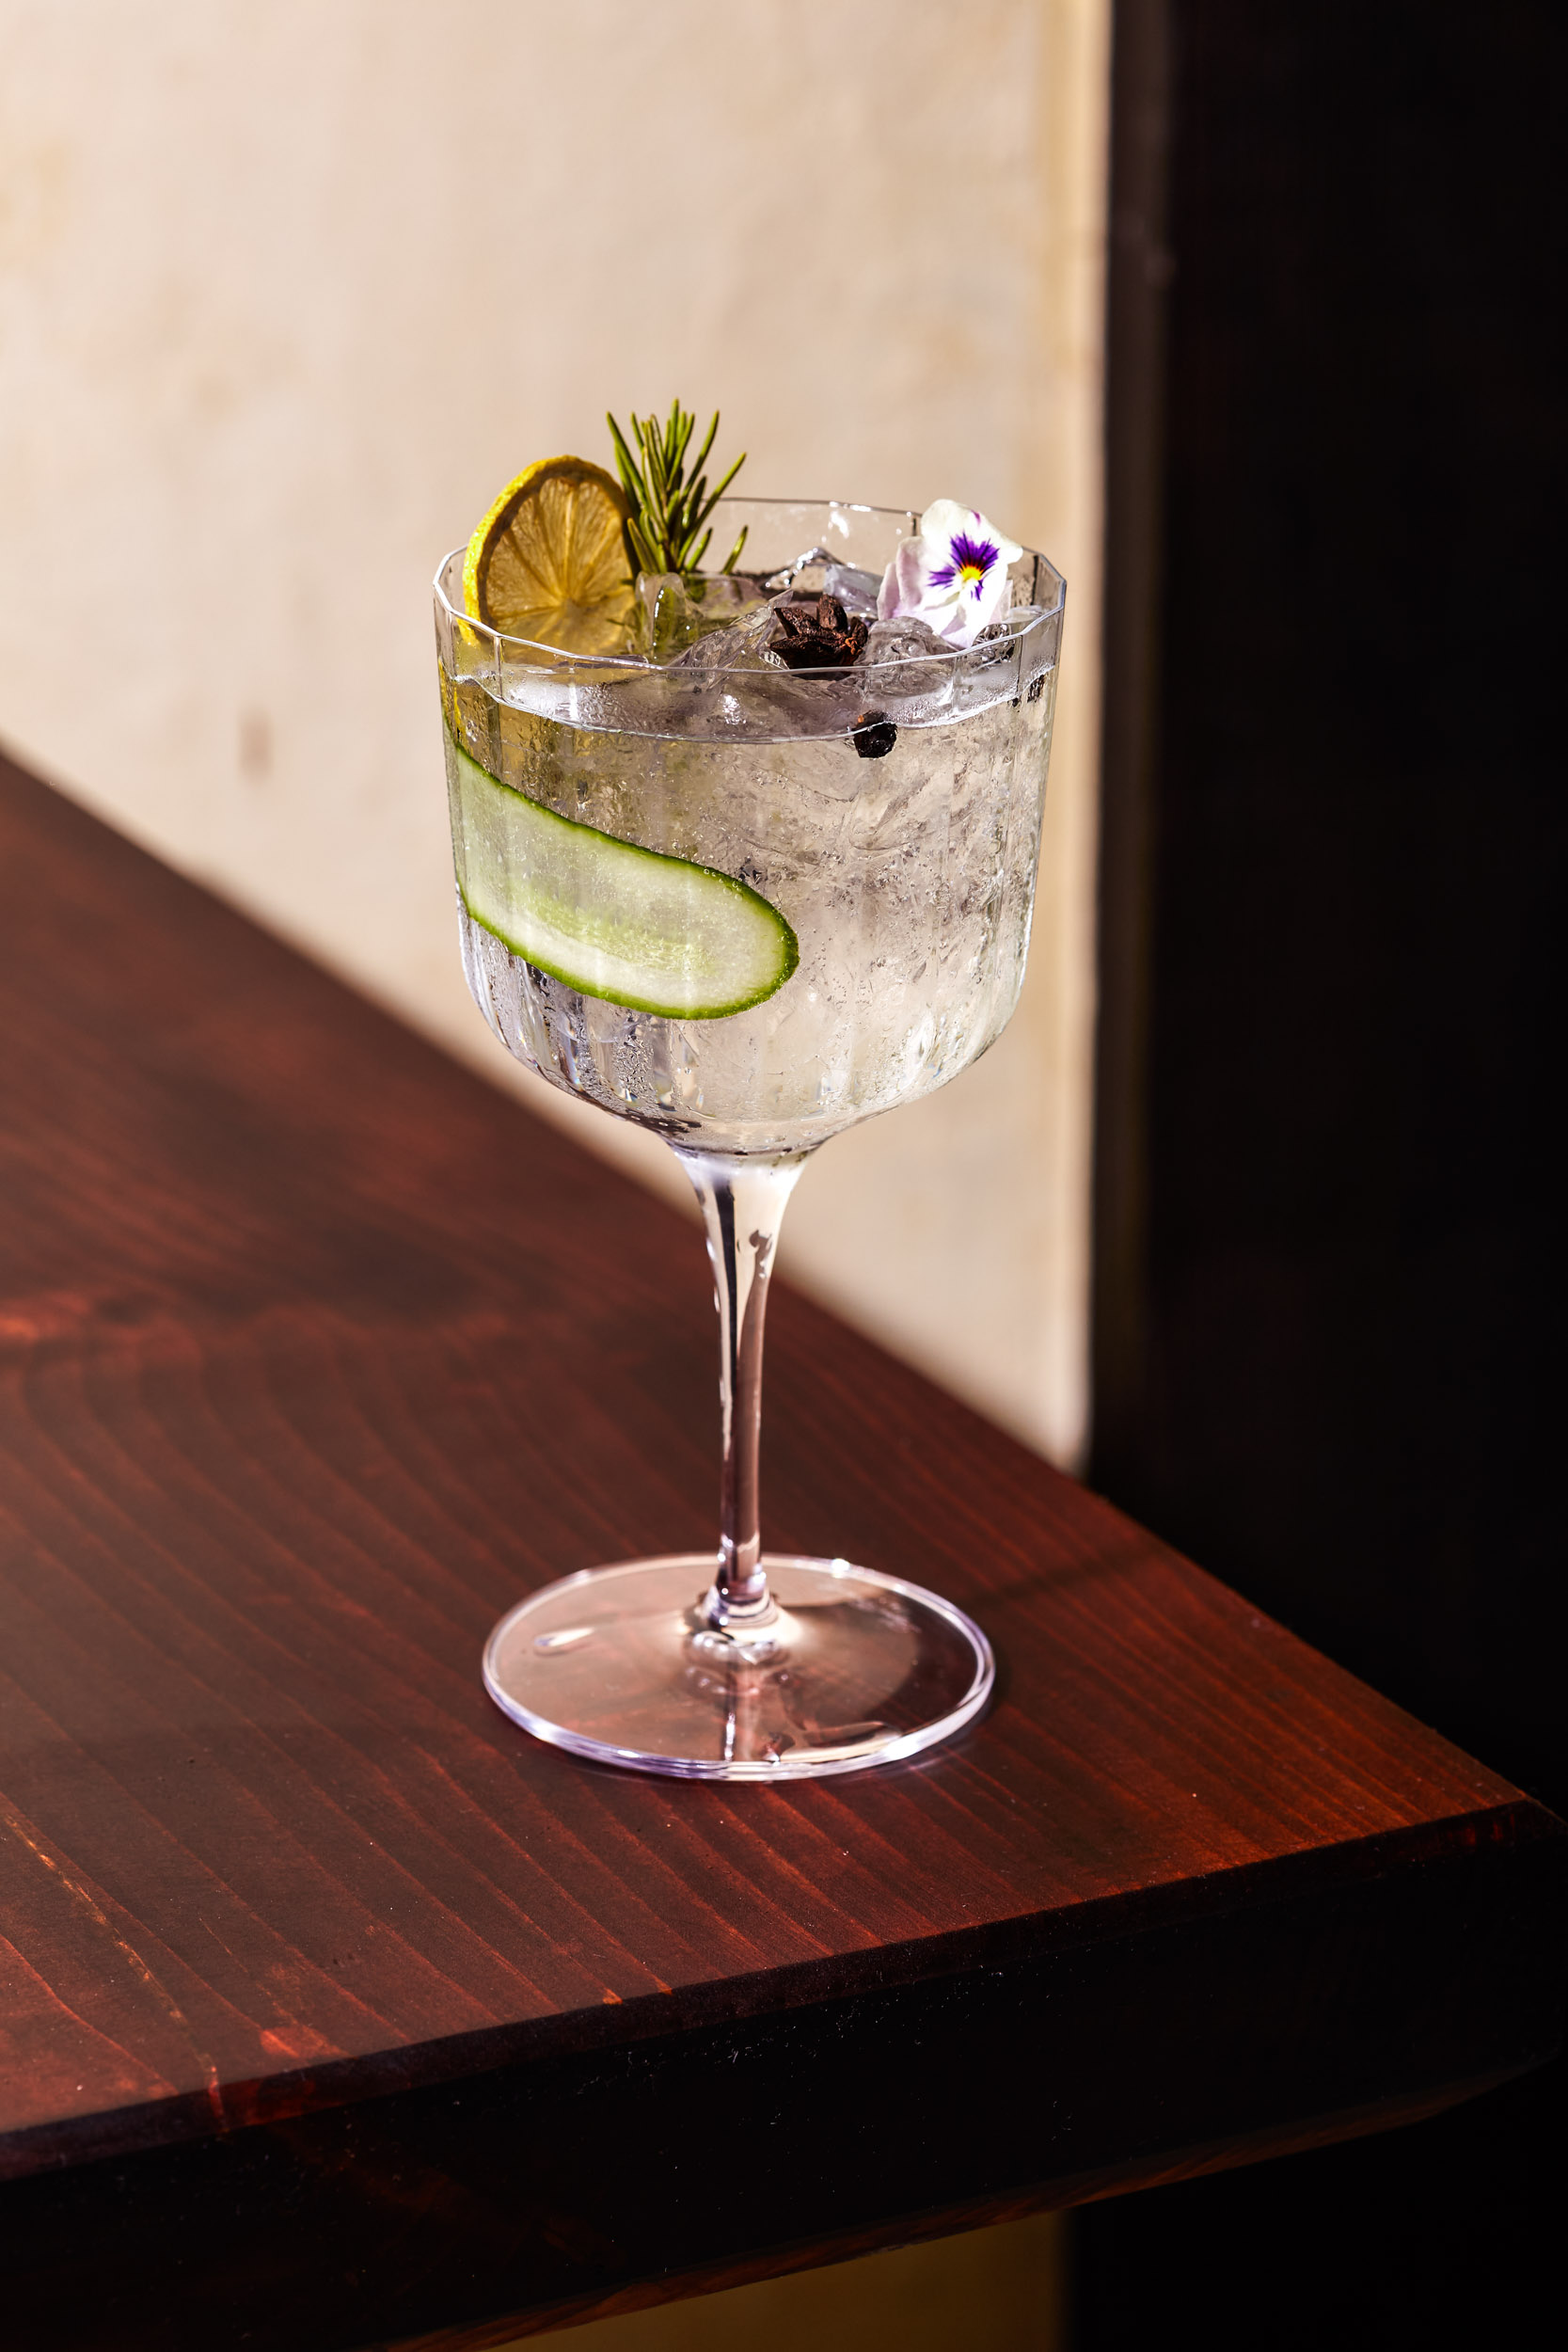 Gin is the focus at the new bar, with a diverse selection of gins from around the world.